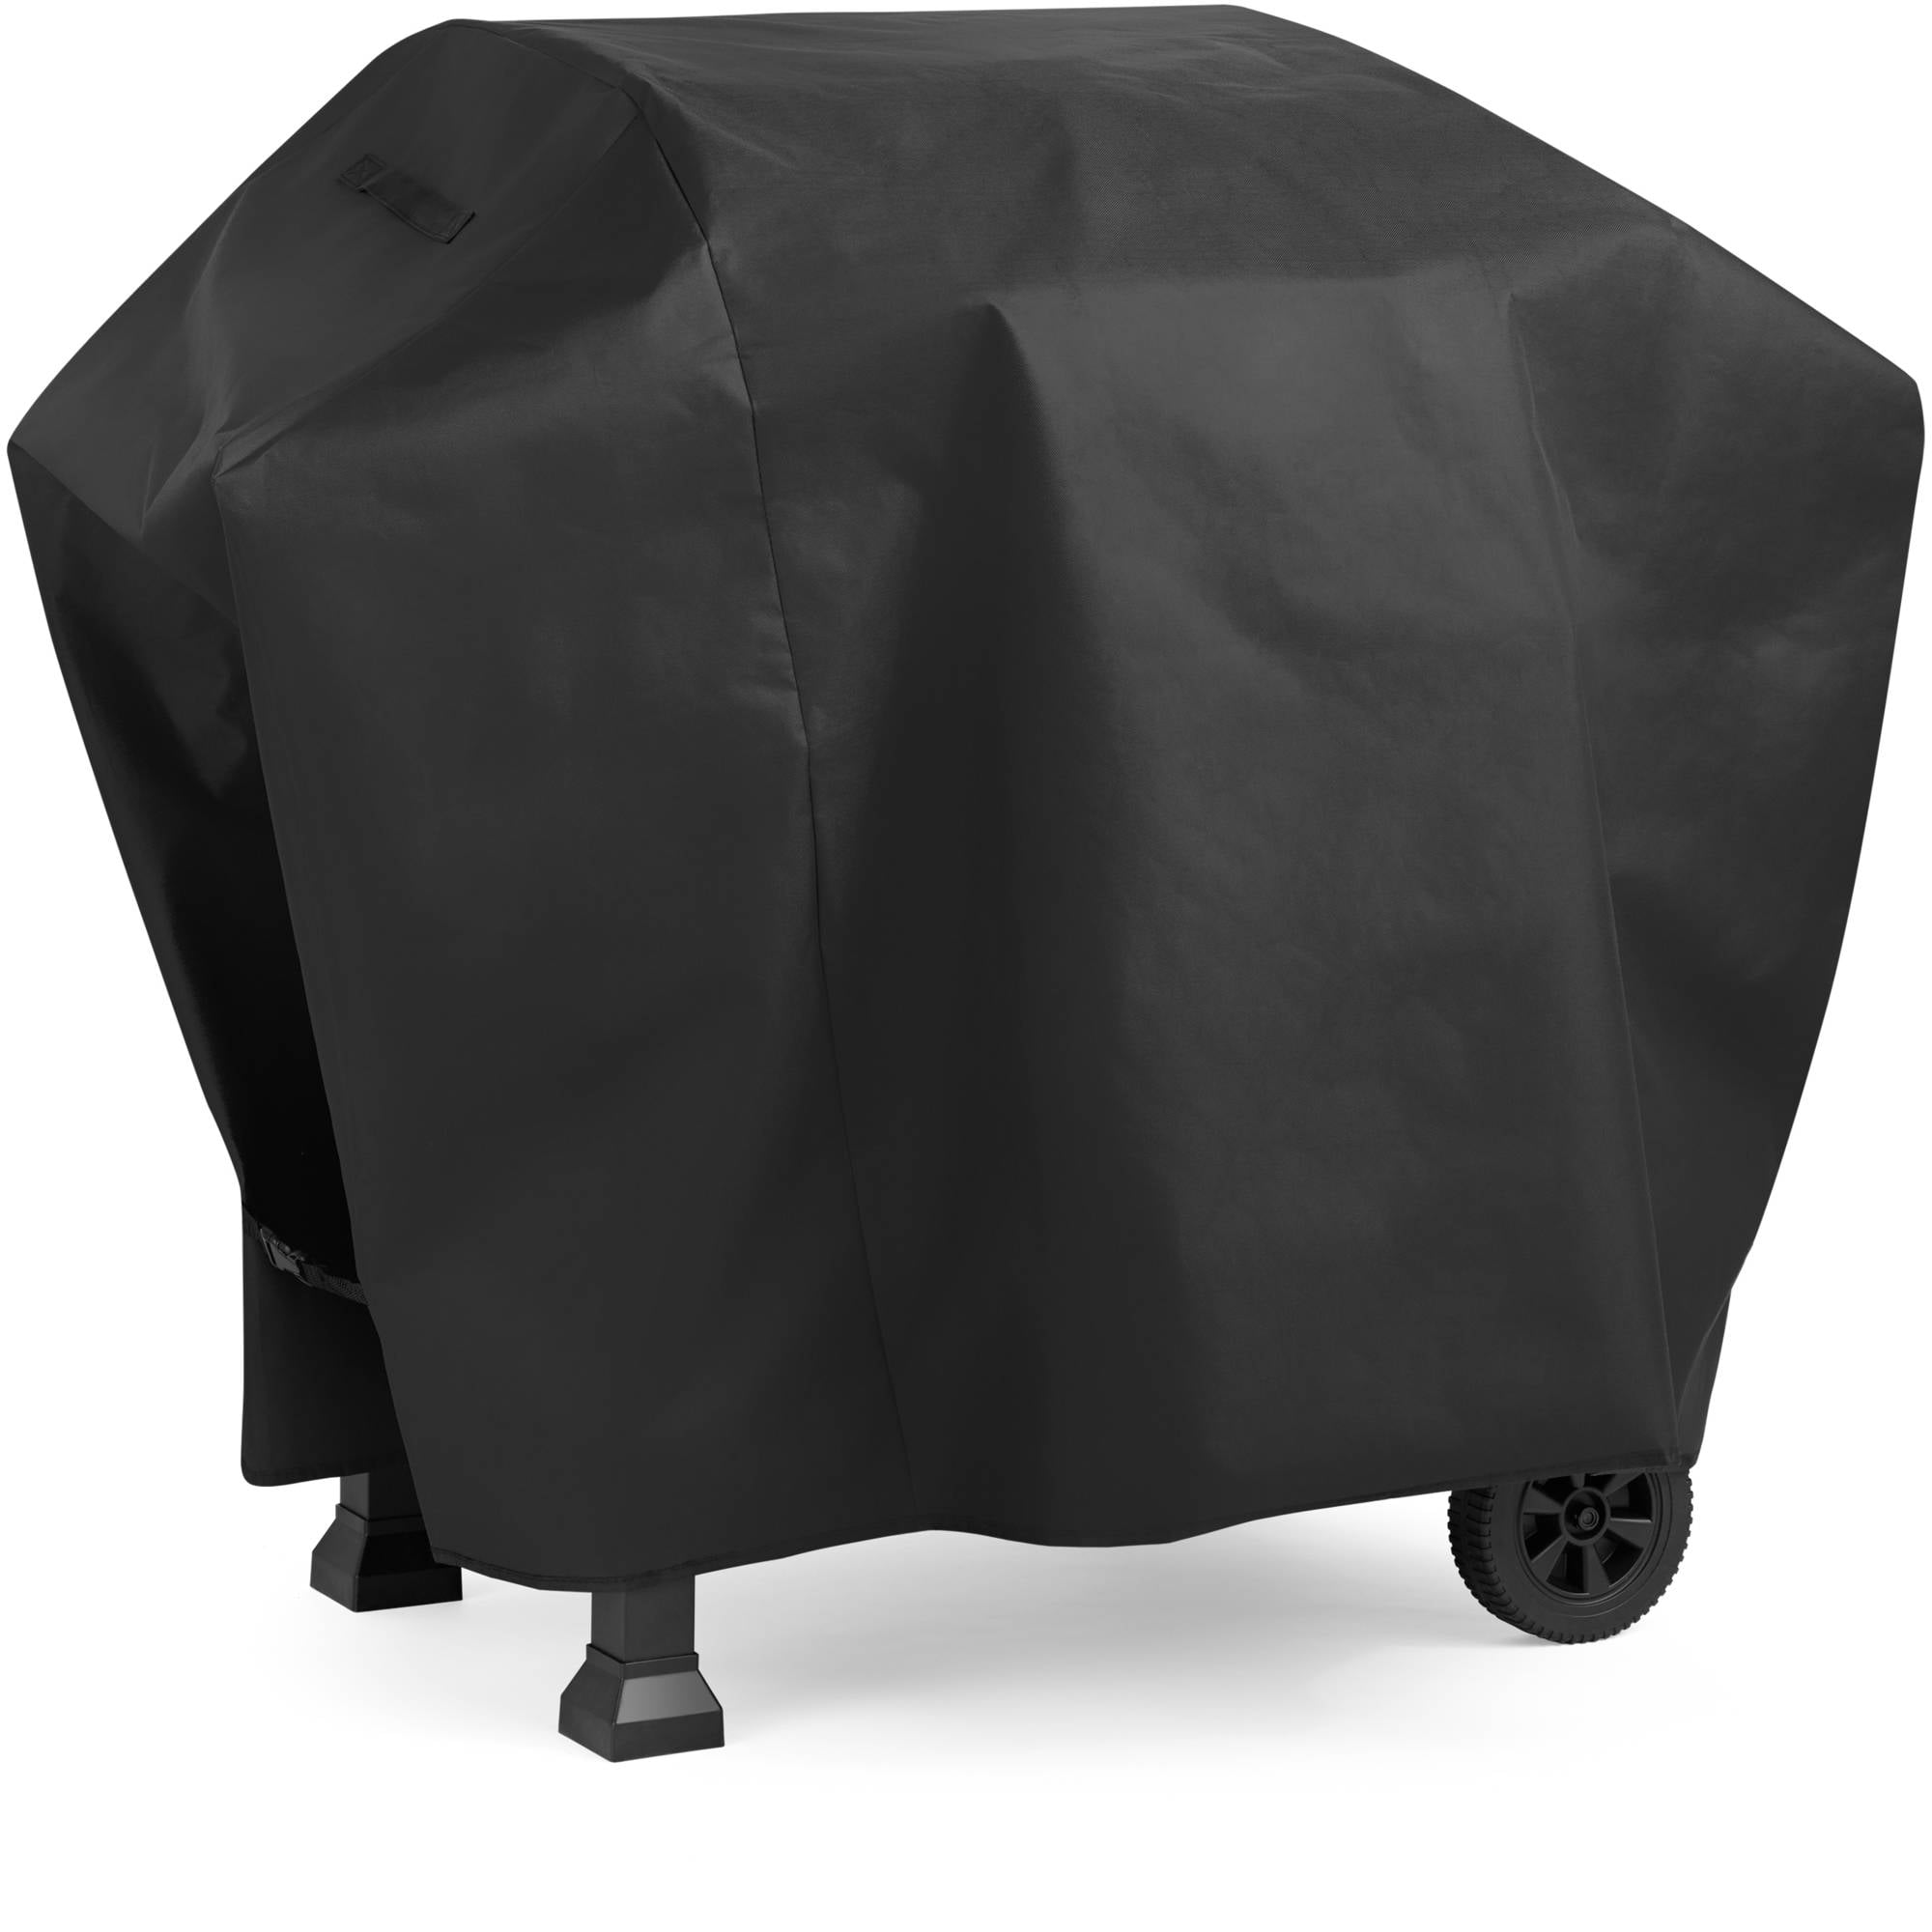 Iptienda BBQ Grill Cover Expert Grill Covers Heavy Duty Waterproof 55 inch Weather-Resistant Gas Grill Cover for Outdoor Barbecue Charcoal Grill